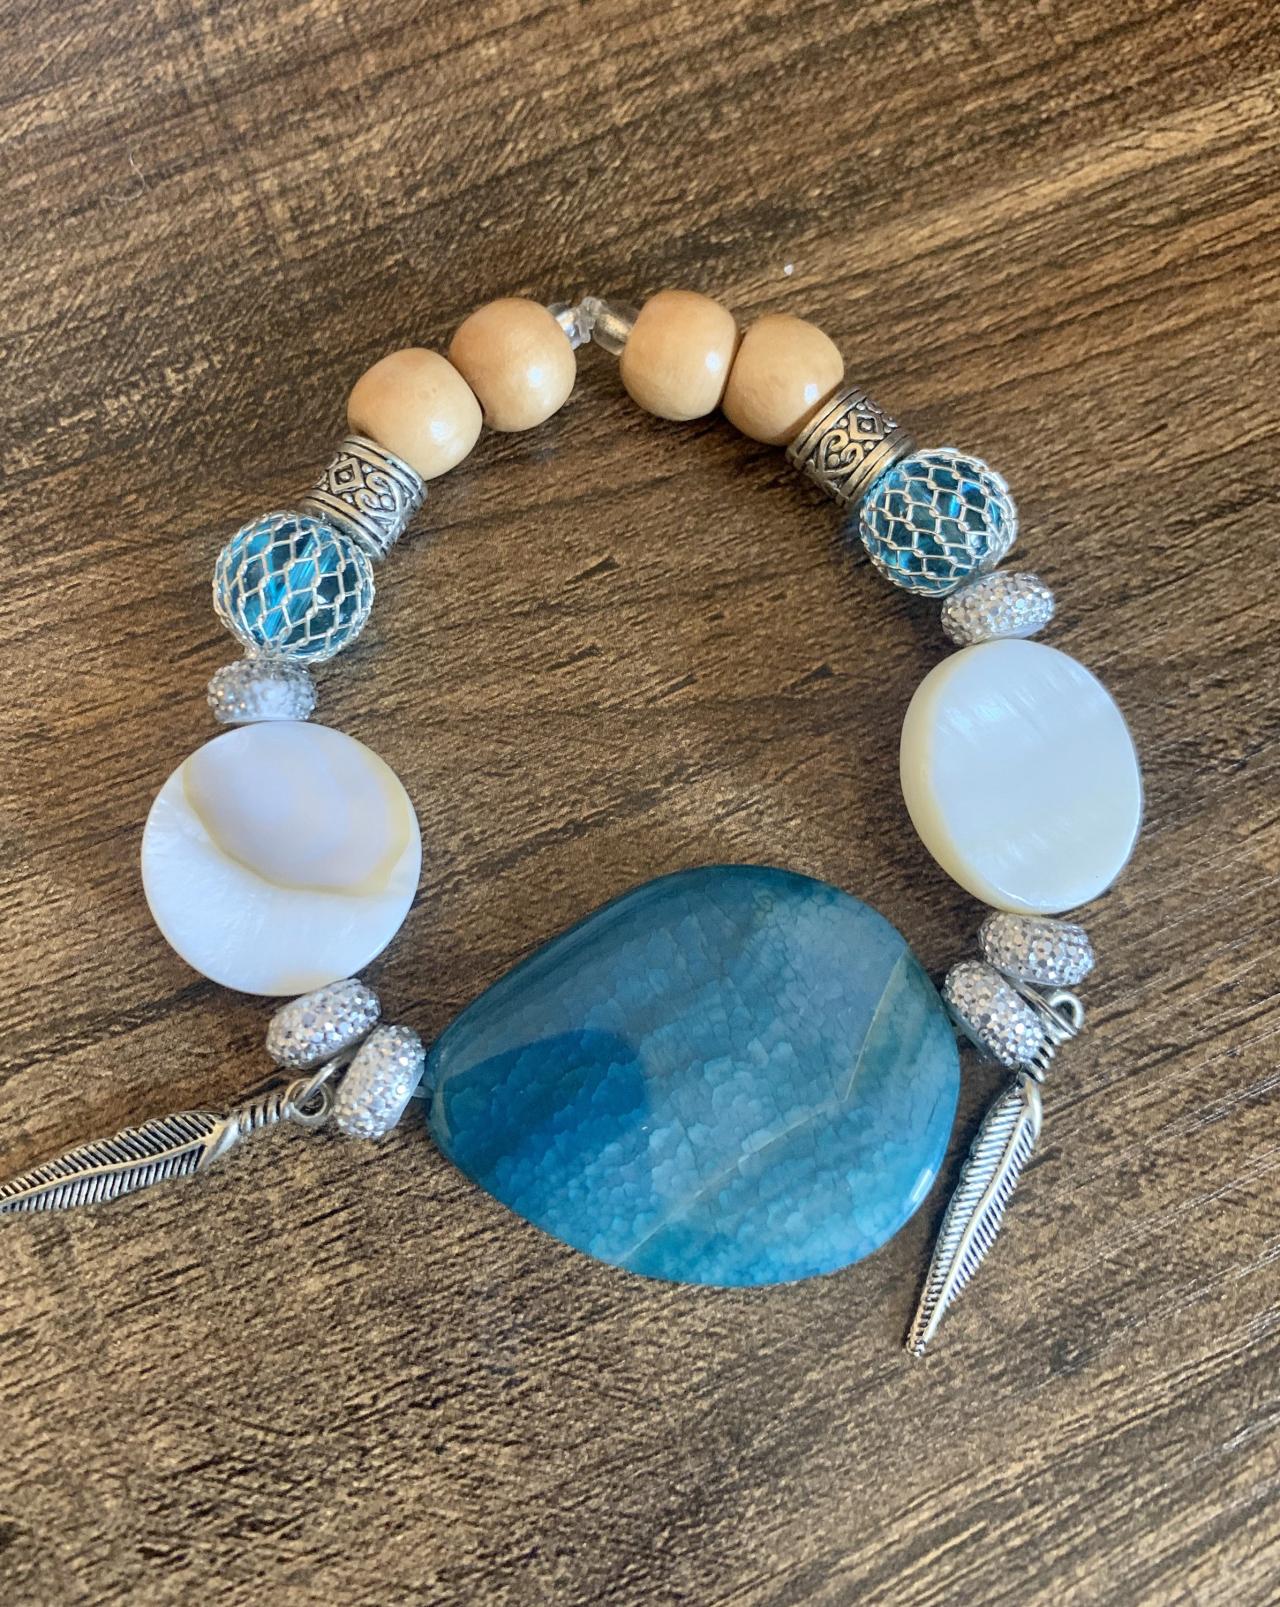 Blue Agate Crystal Gemstone Bracelet for Healing and Mediation with Feathers and White Shell Stretch Bracelet Handmade in the US